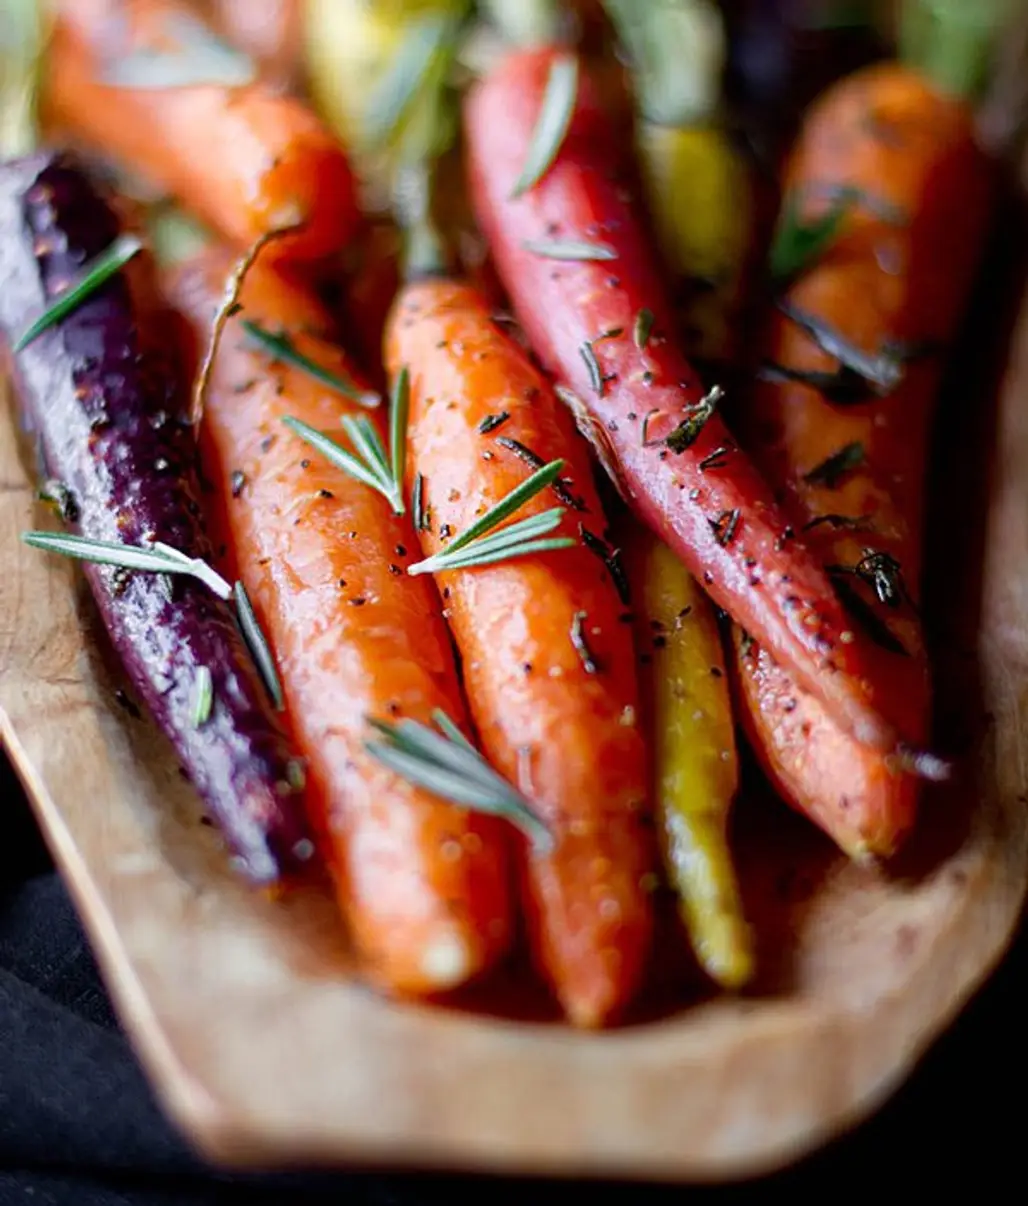 Make Roasted Carrots a Family Favorite